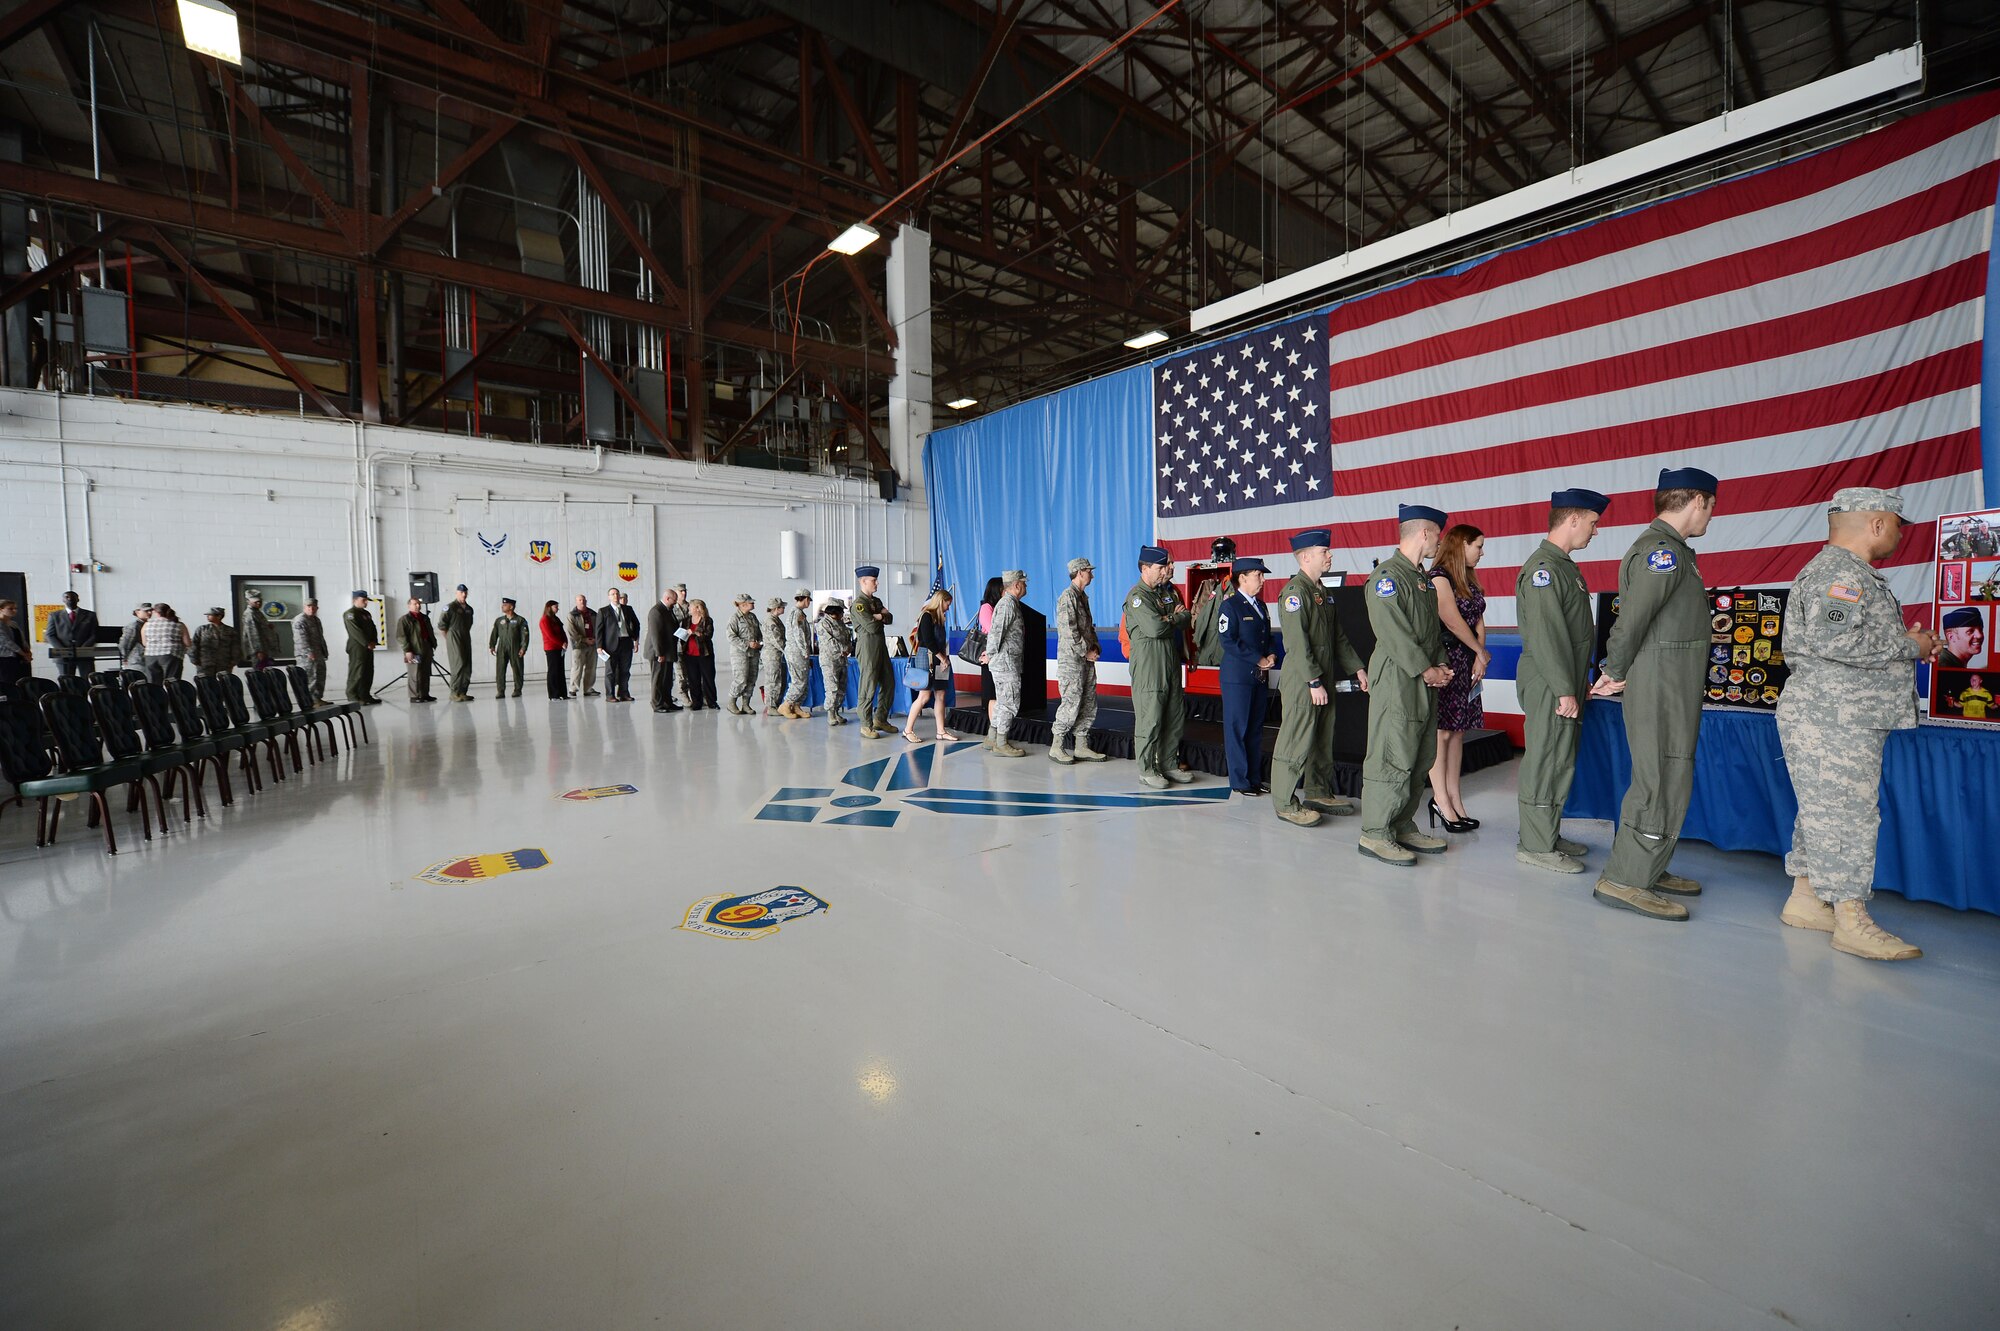 Family, friends and service members view a display of career achievements at a memorial ceremony at Shaw Air Force Base, S.C., April 30, 2013.  The memorial ceremony commemorated the life and accomplishments of Capt. James Steel, 77th Fighter Squadron pilot, who died in an F-16 Fighting Falcon aircraft accident, while deployed to Afghanistan.  (U.S. Air Force photo by Airman 1st Class Nicole Sikorski/Released)